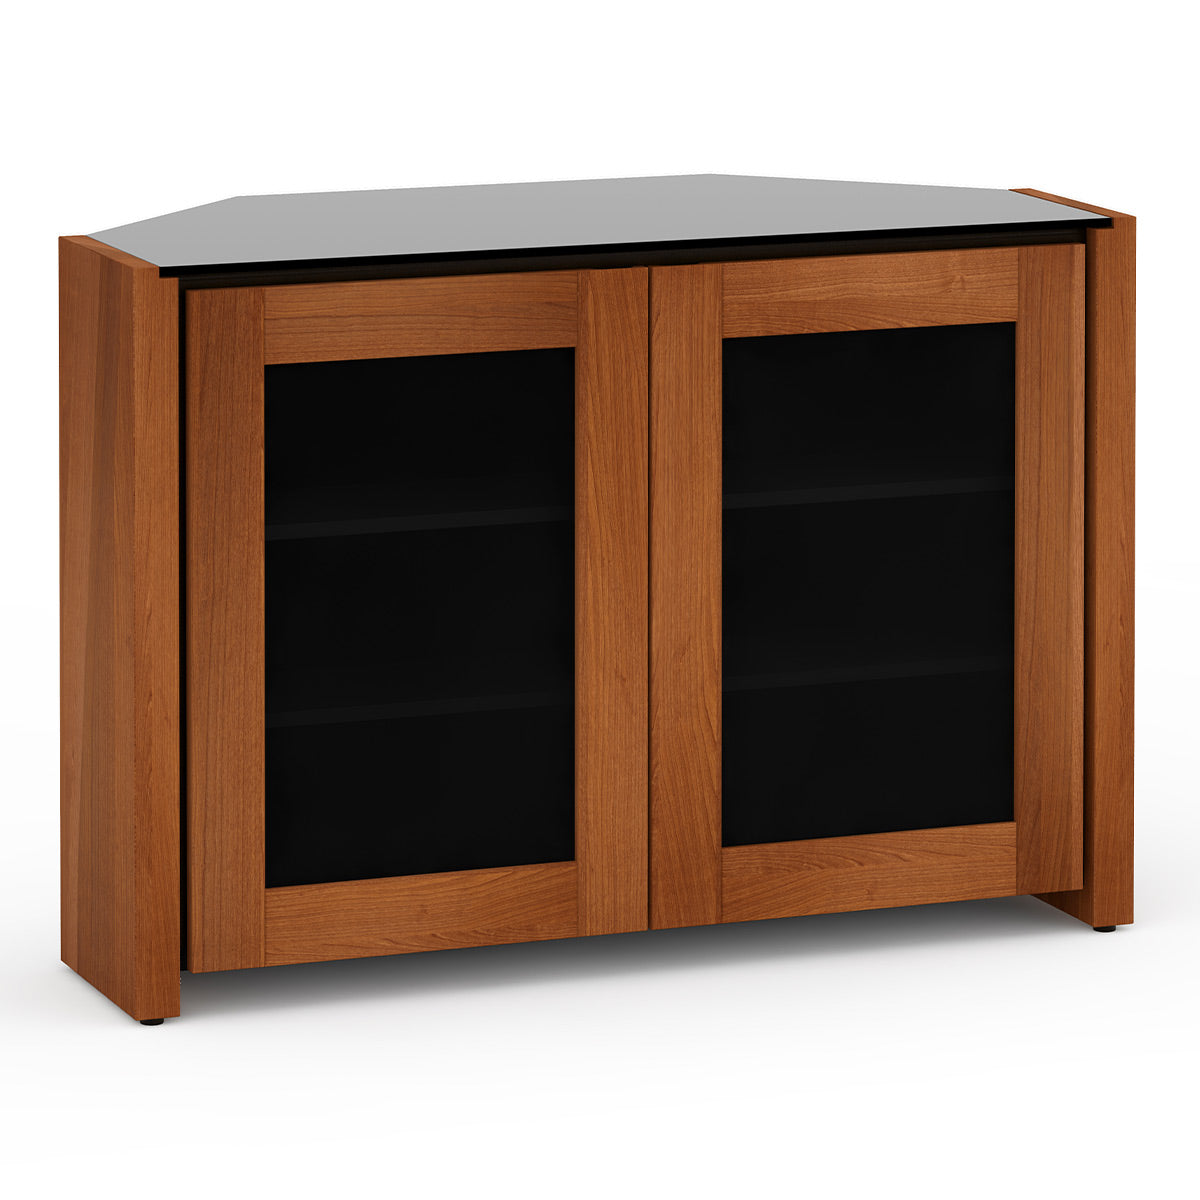 Salamander Chameleon Collection Corsica 323 Twin Corner AV Cabinet (Thick Cherry with Black Glass Top)